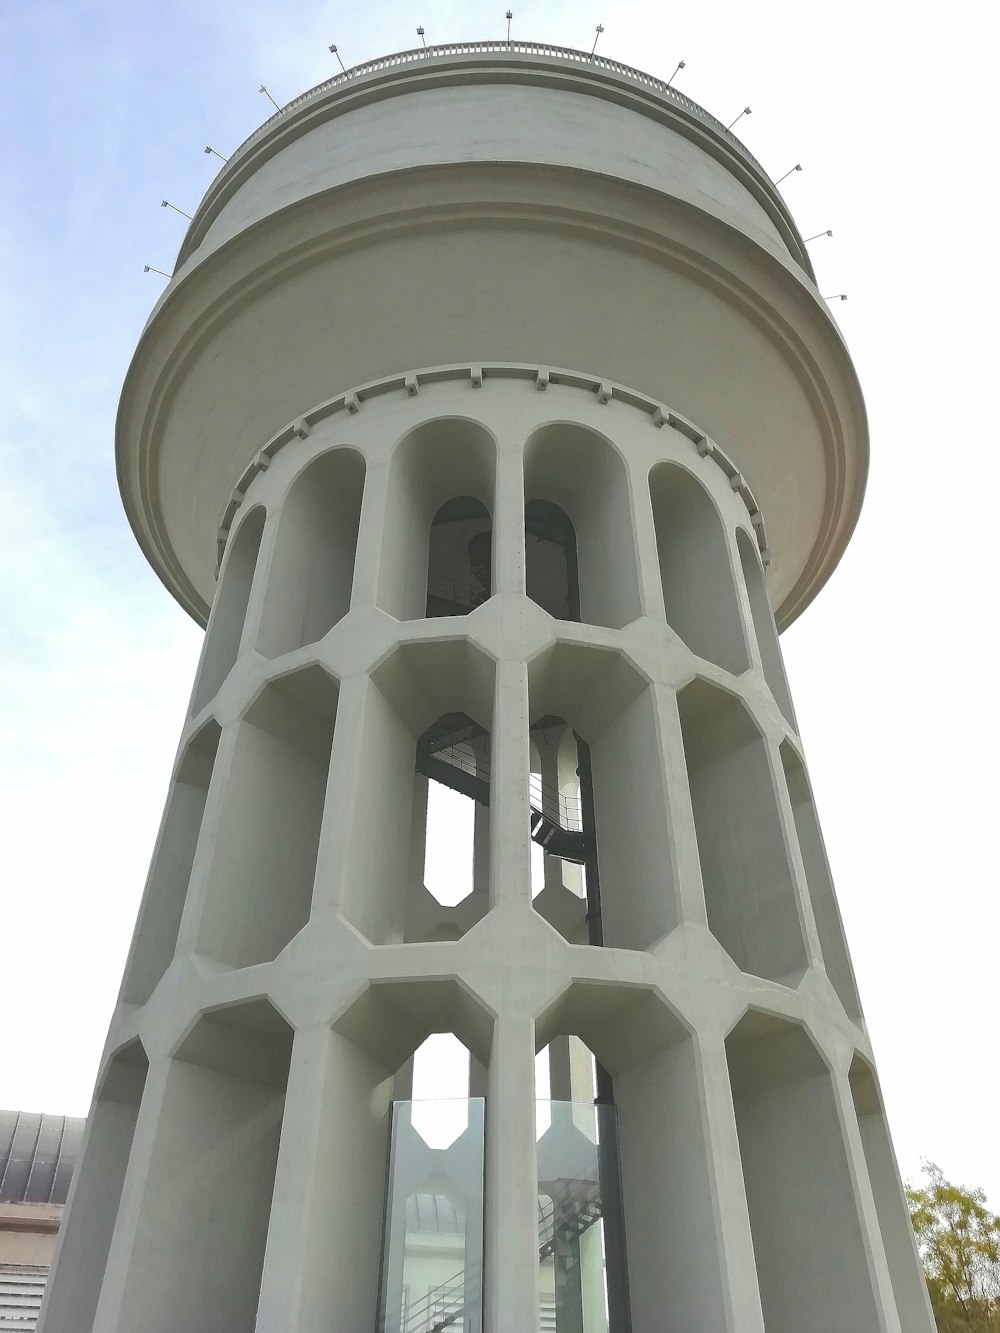 a white tower with a round top